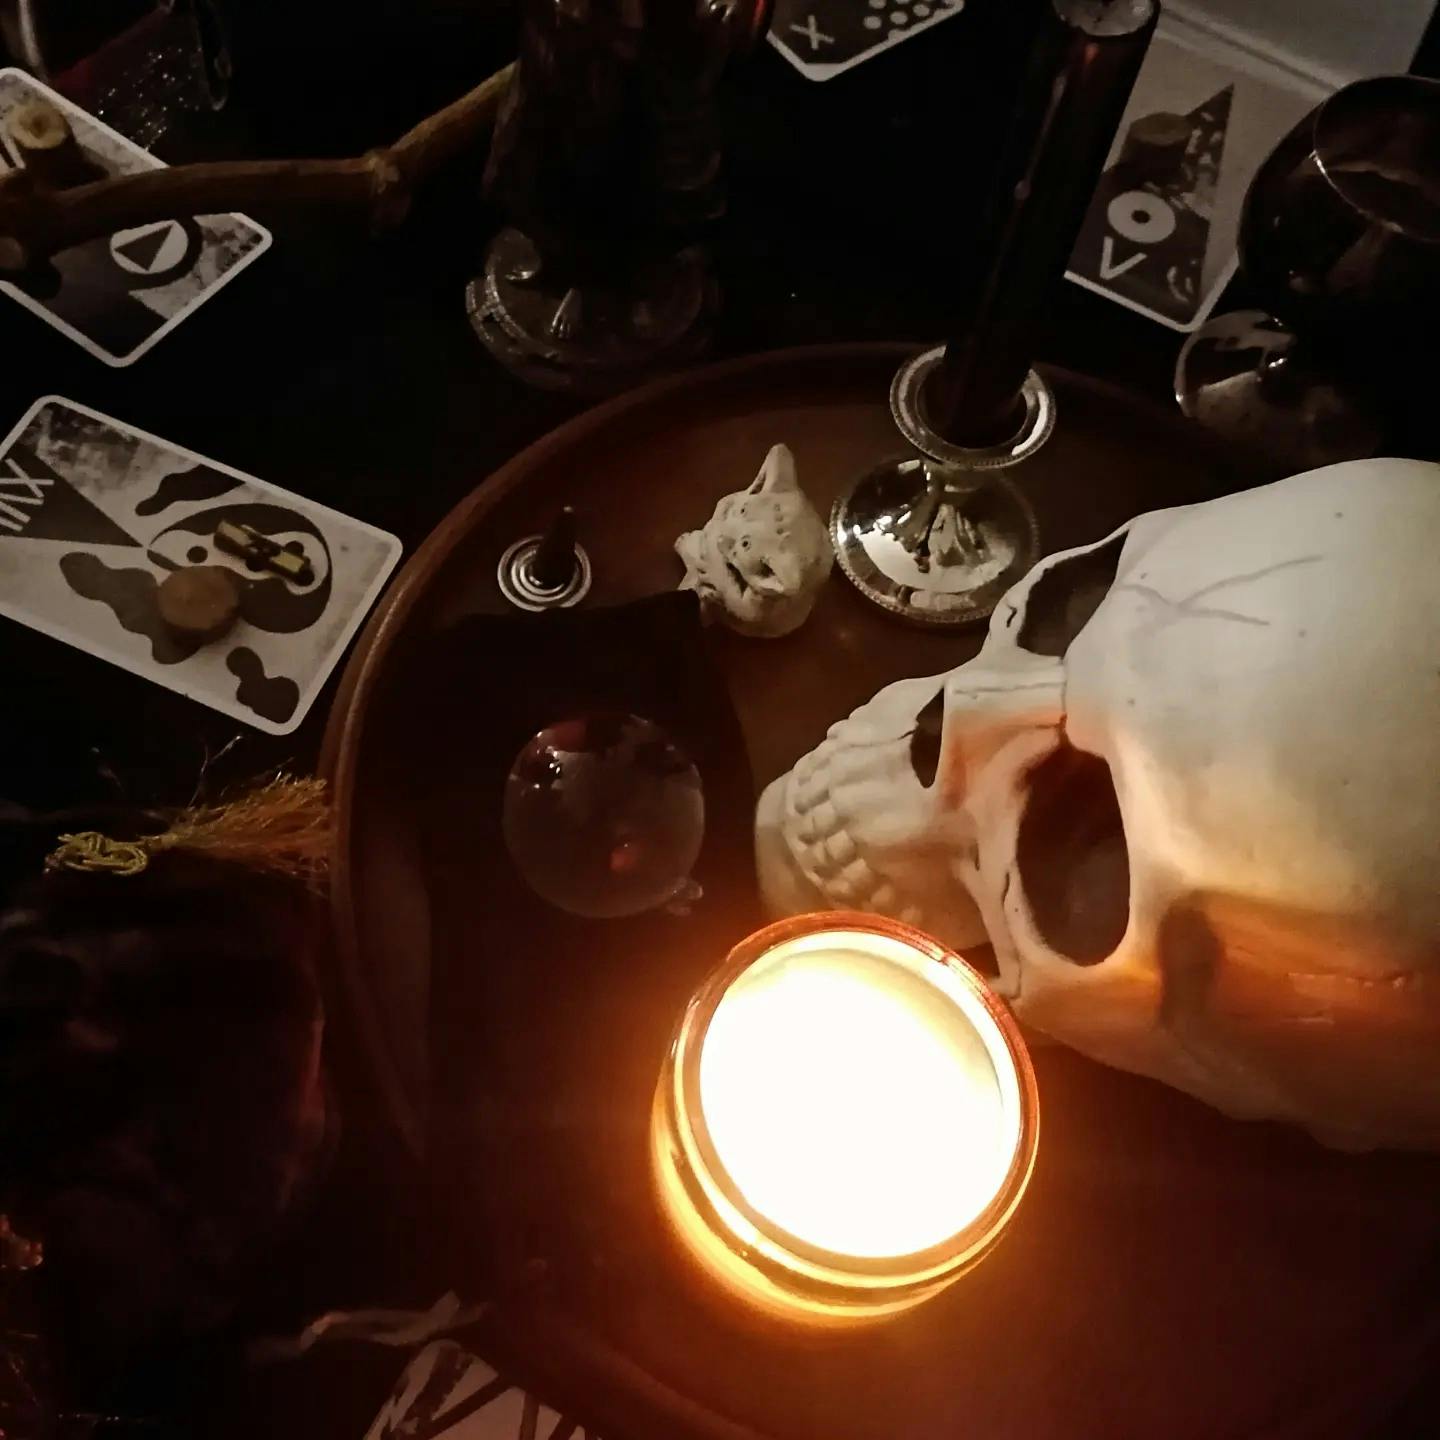 A Samhain altar with lit candle, plastic human skull, and black and white tarot cards, a small crystal ball, and incense cone - viewed from above.